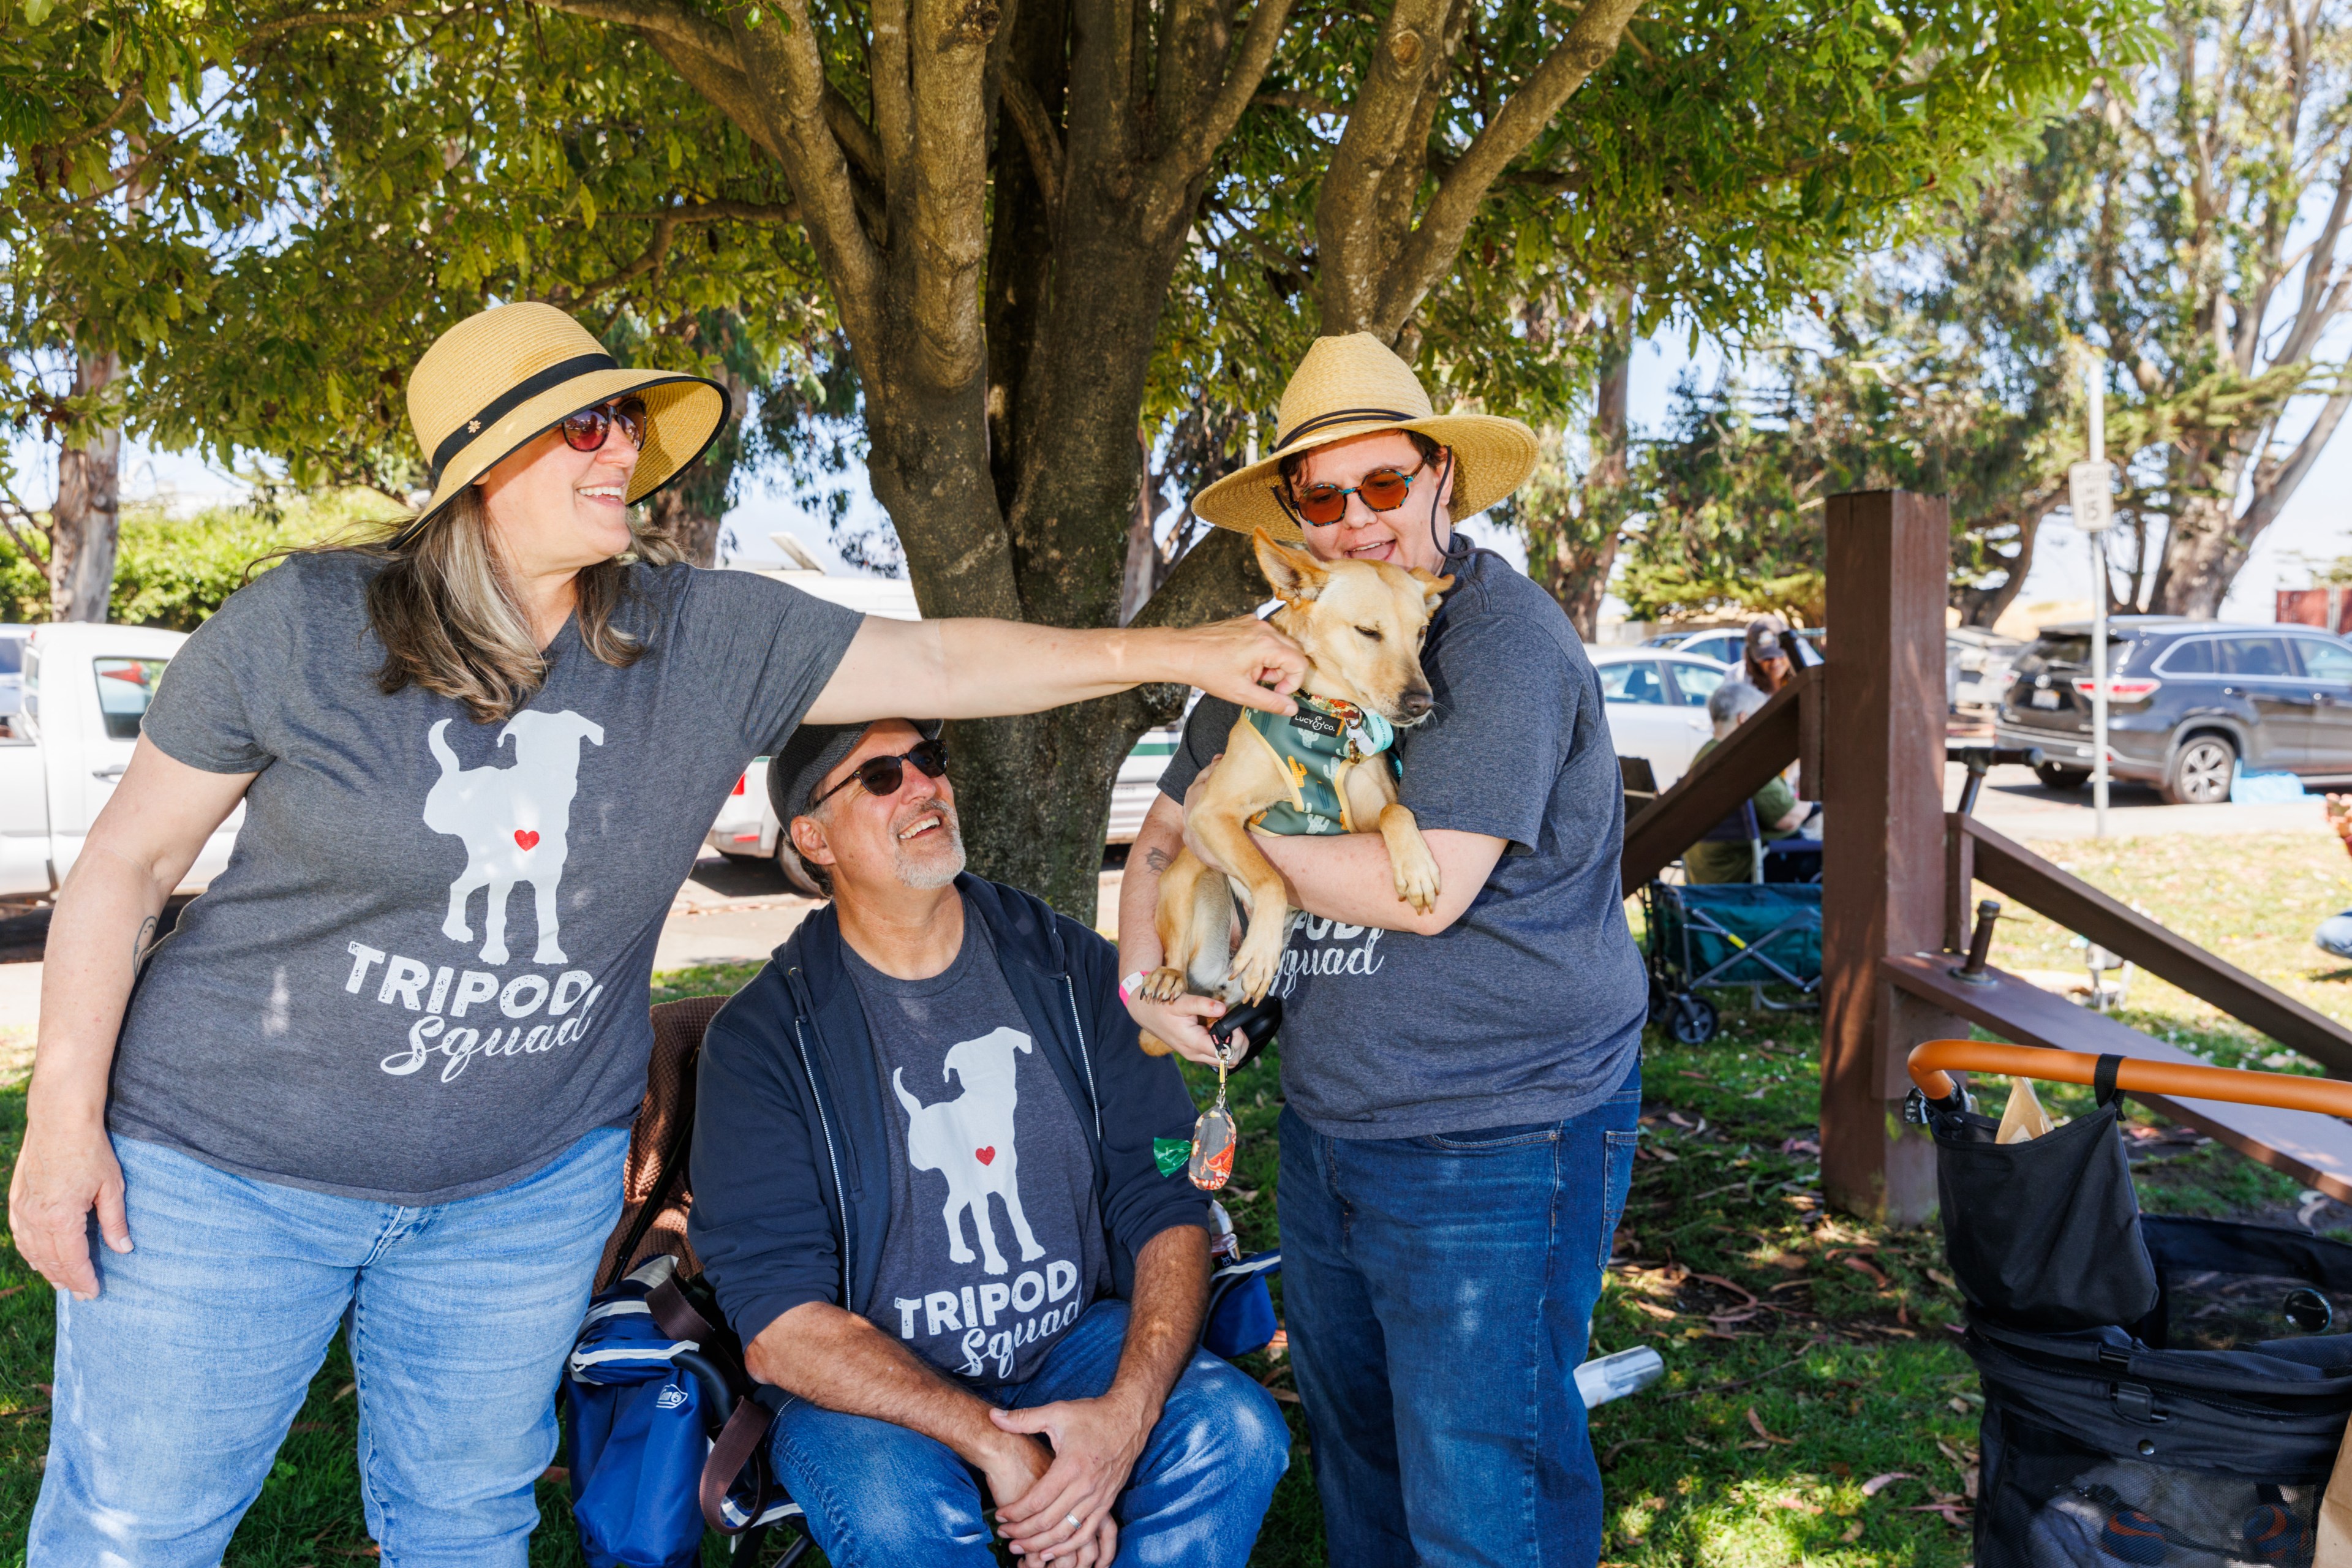 Three people wearing &quot;Tripod Squad&quot; shirts and hats are gathered under a tree. One woman holds a light-colored dog, and another woman reaches out to pet it.